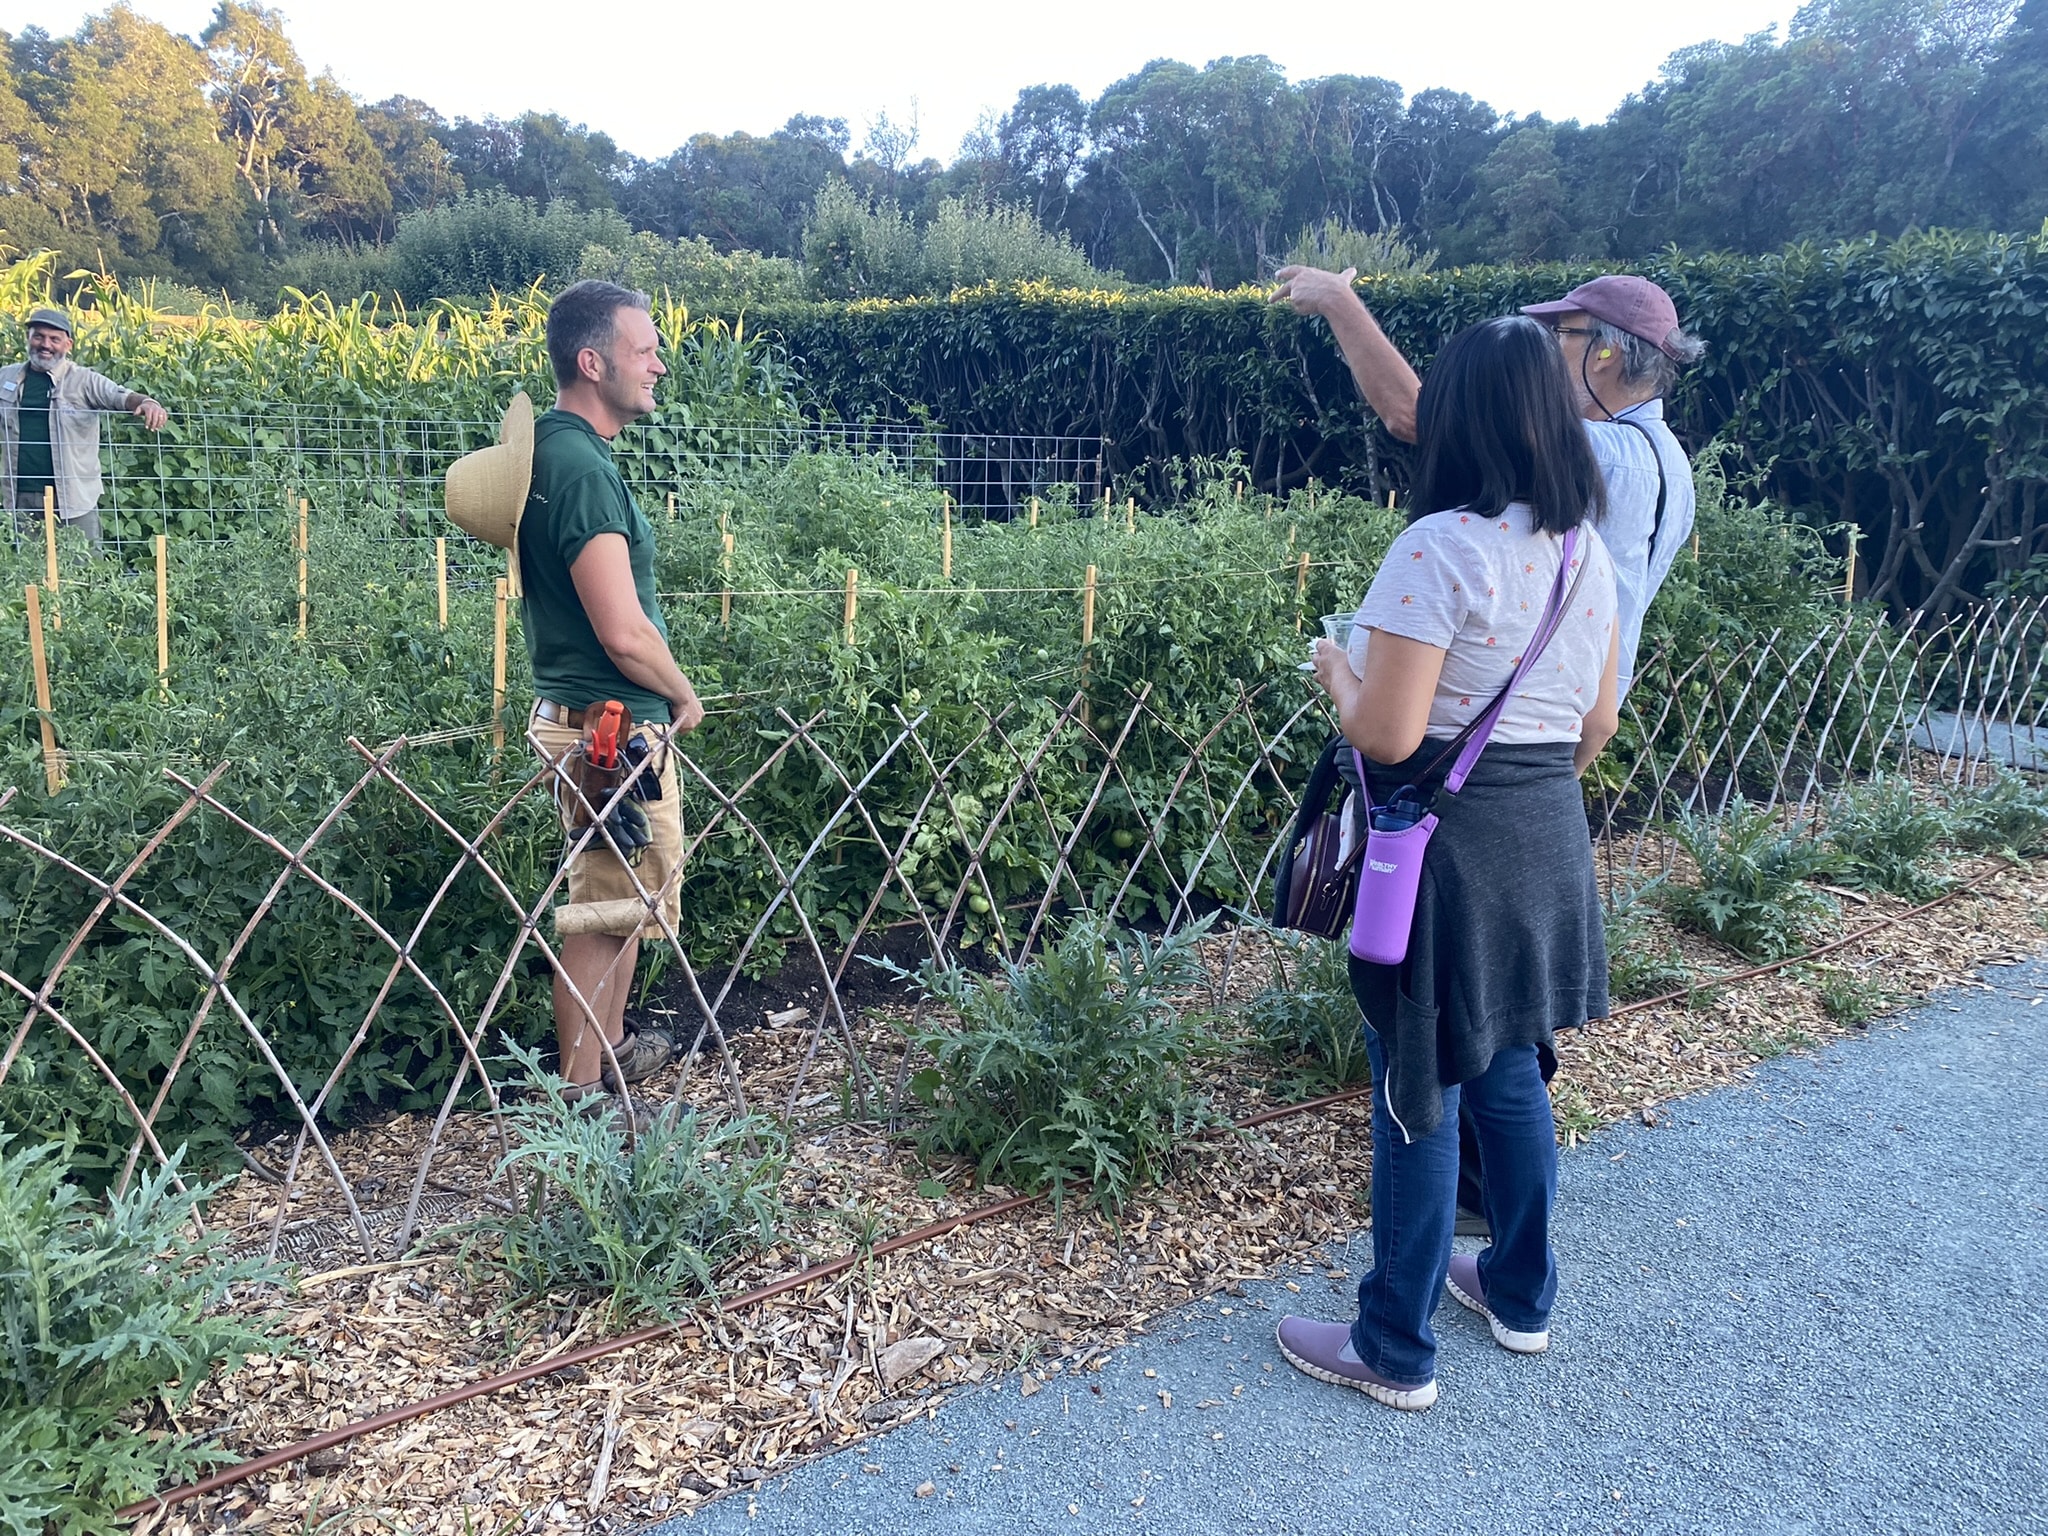 Filoli staff members James and Jim talk with visitors in the Vegetable Garden during Summer Nights, September 2022.